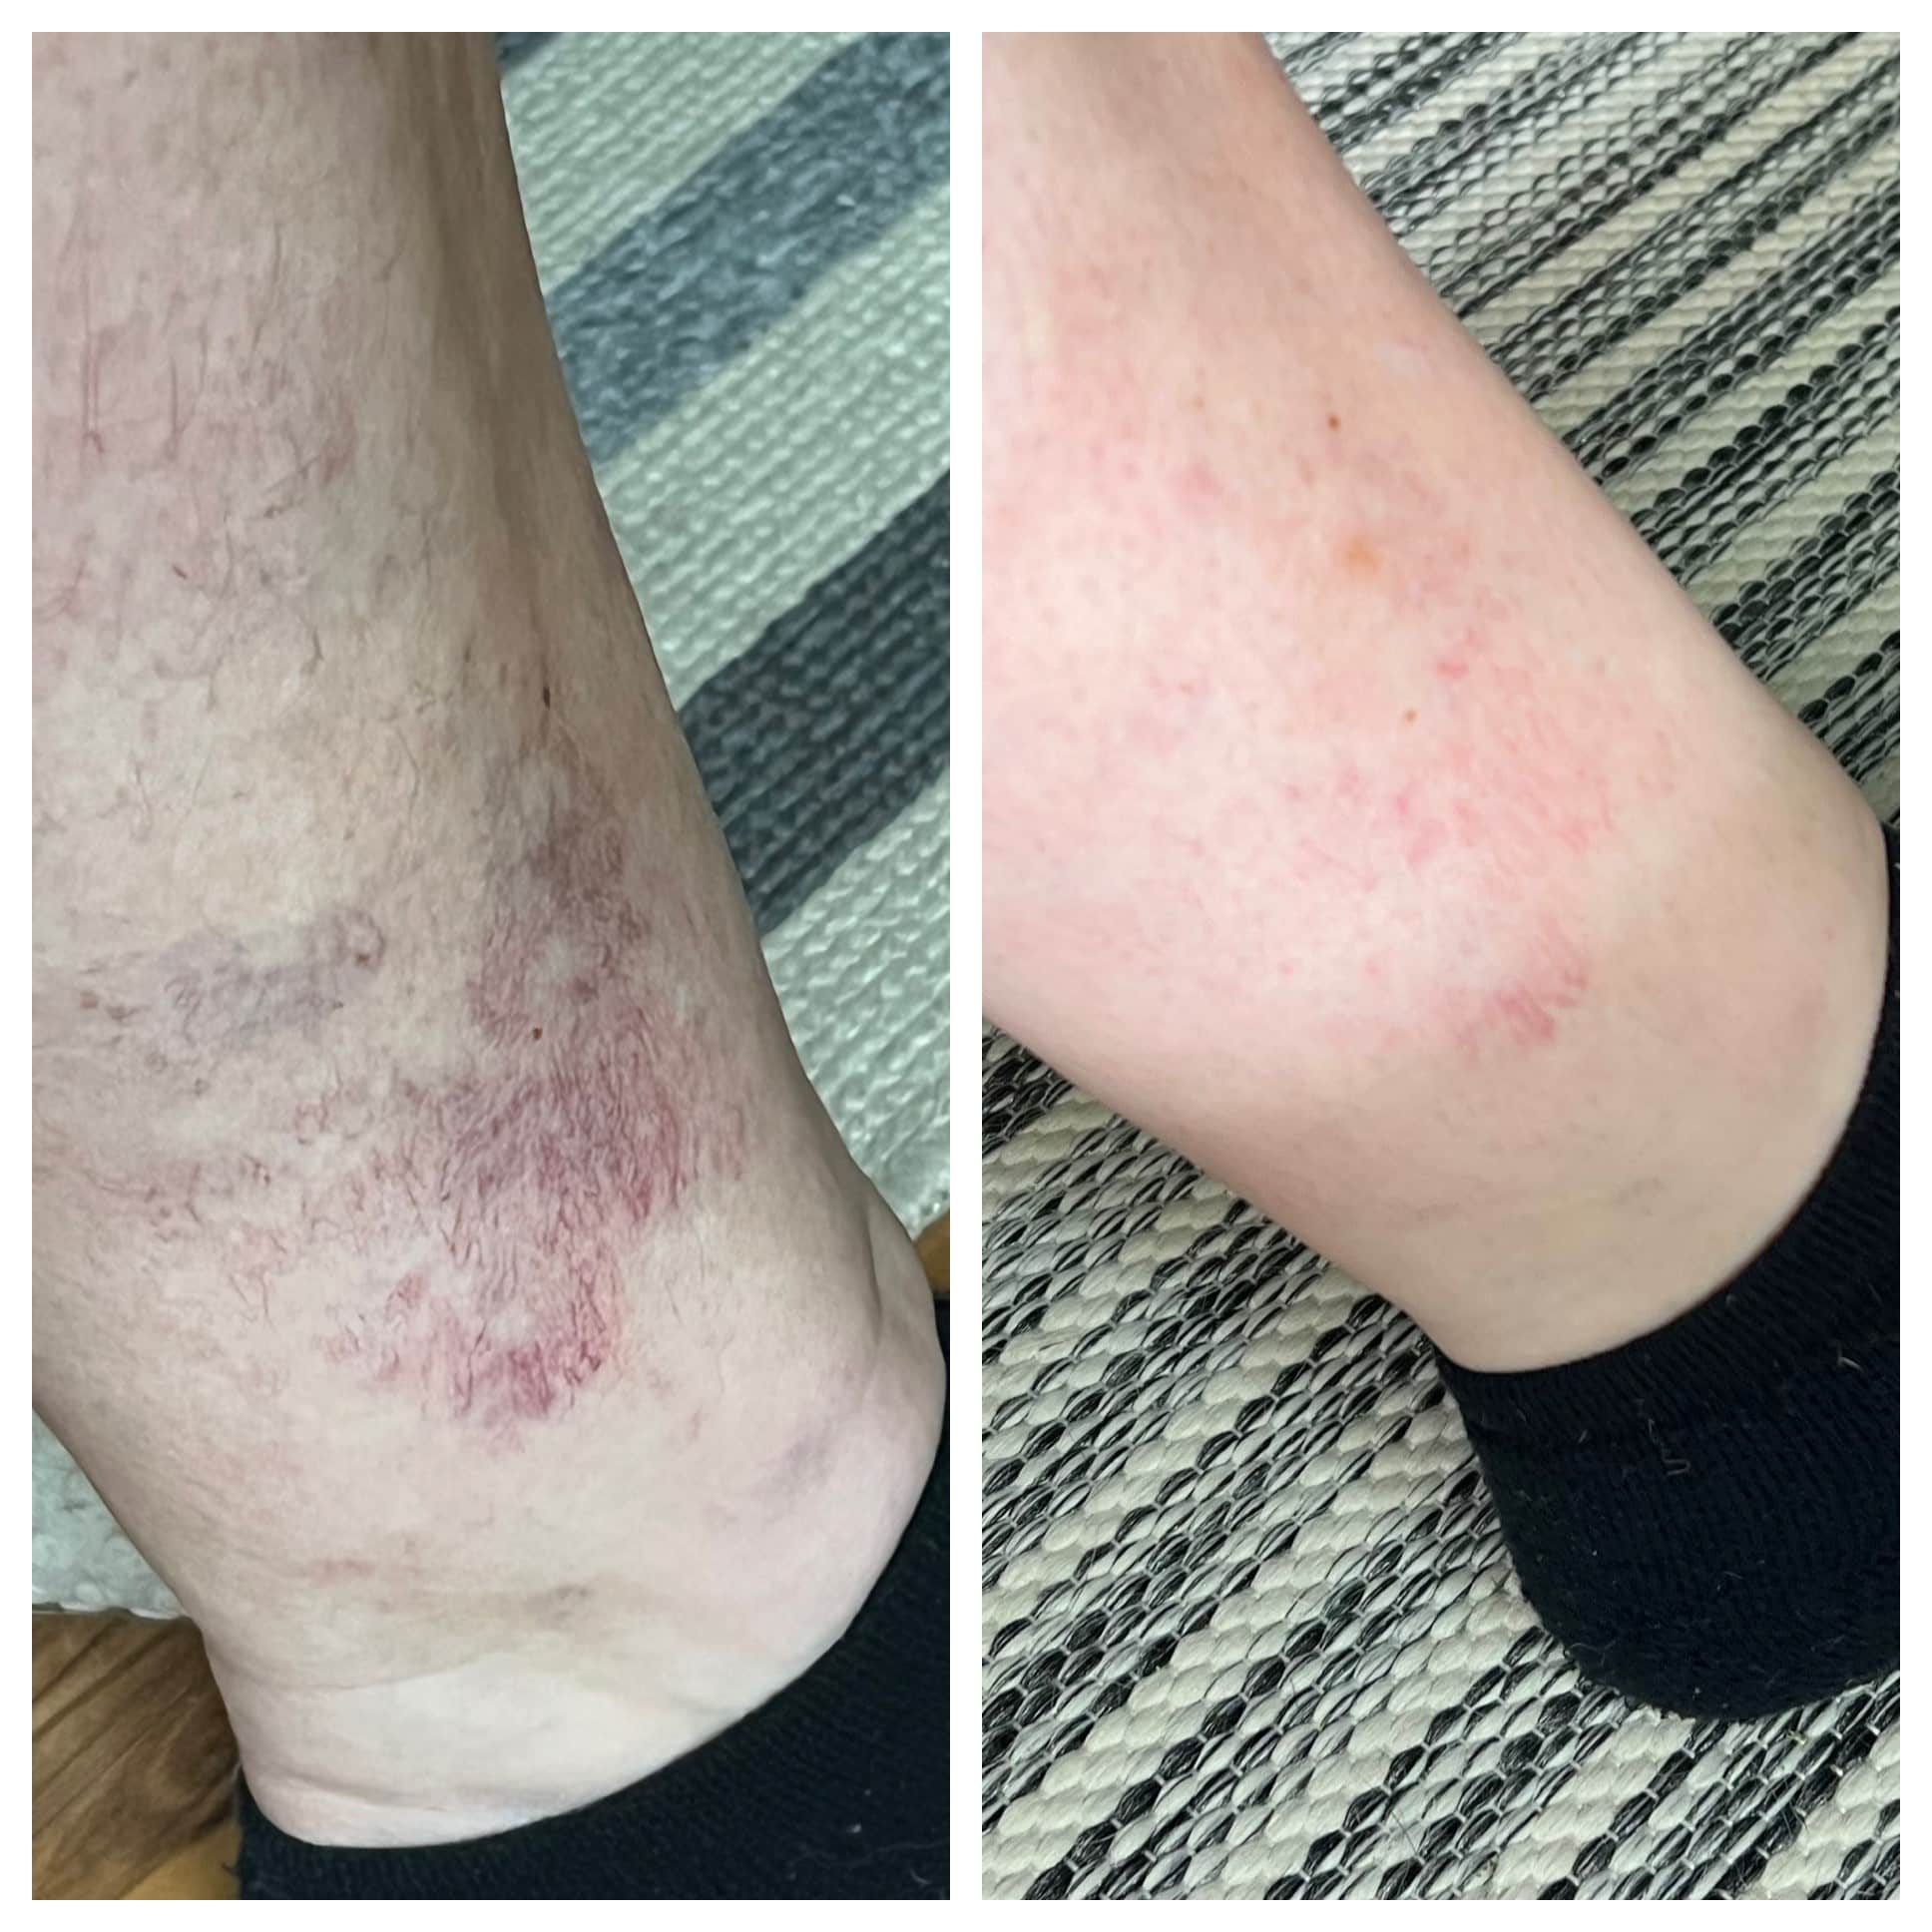 spider veins on lower leg before and after treatment